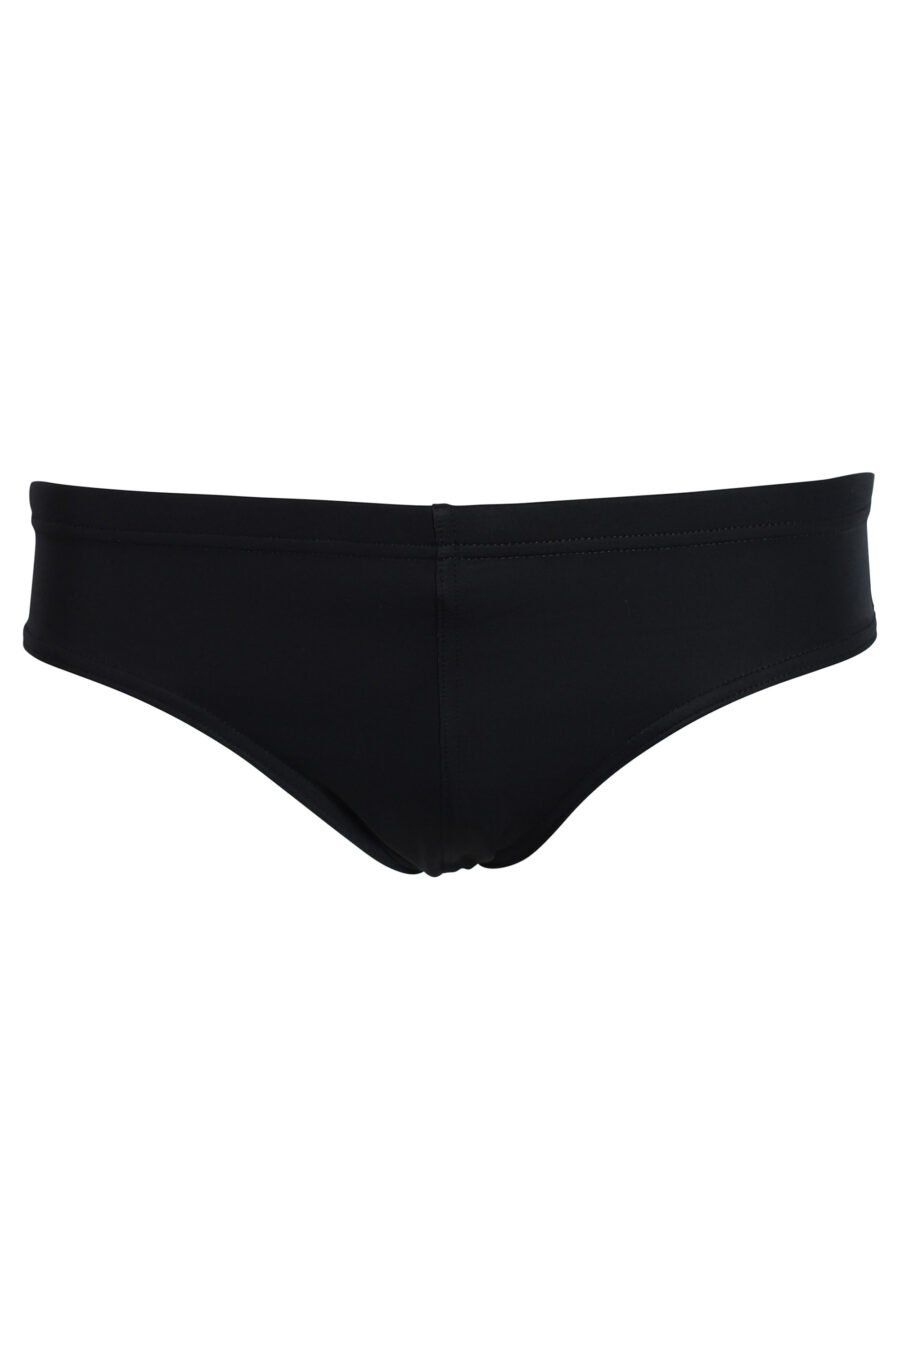 Black briefs with white maxilogue back - 8032674644596